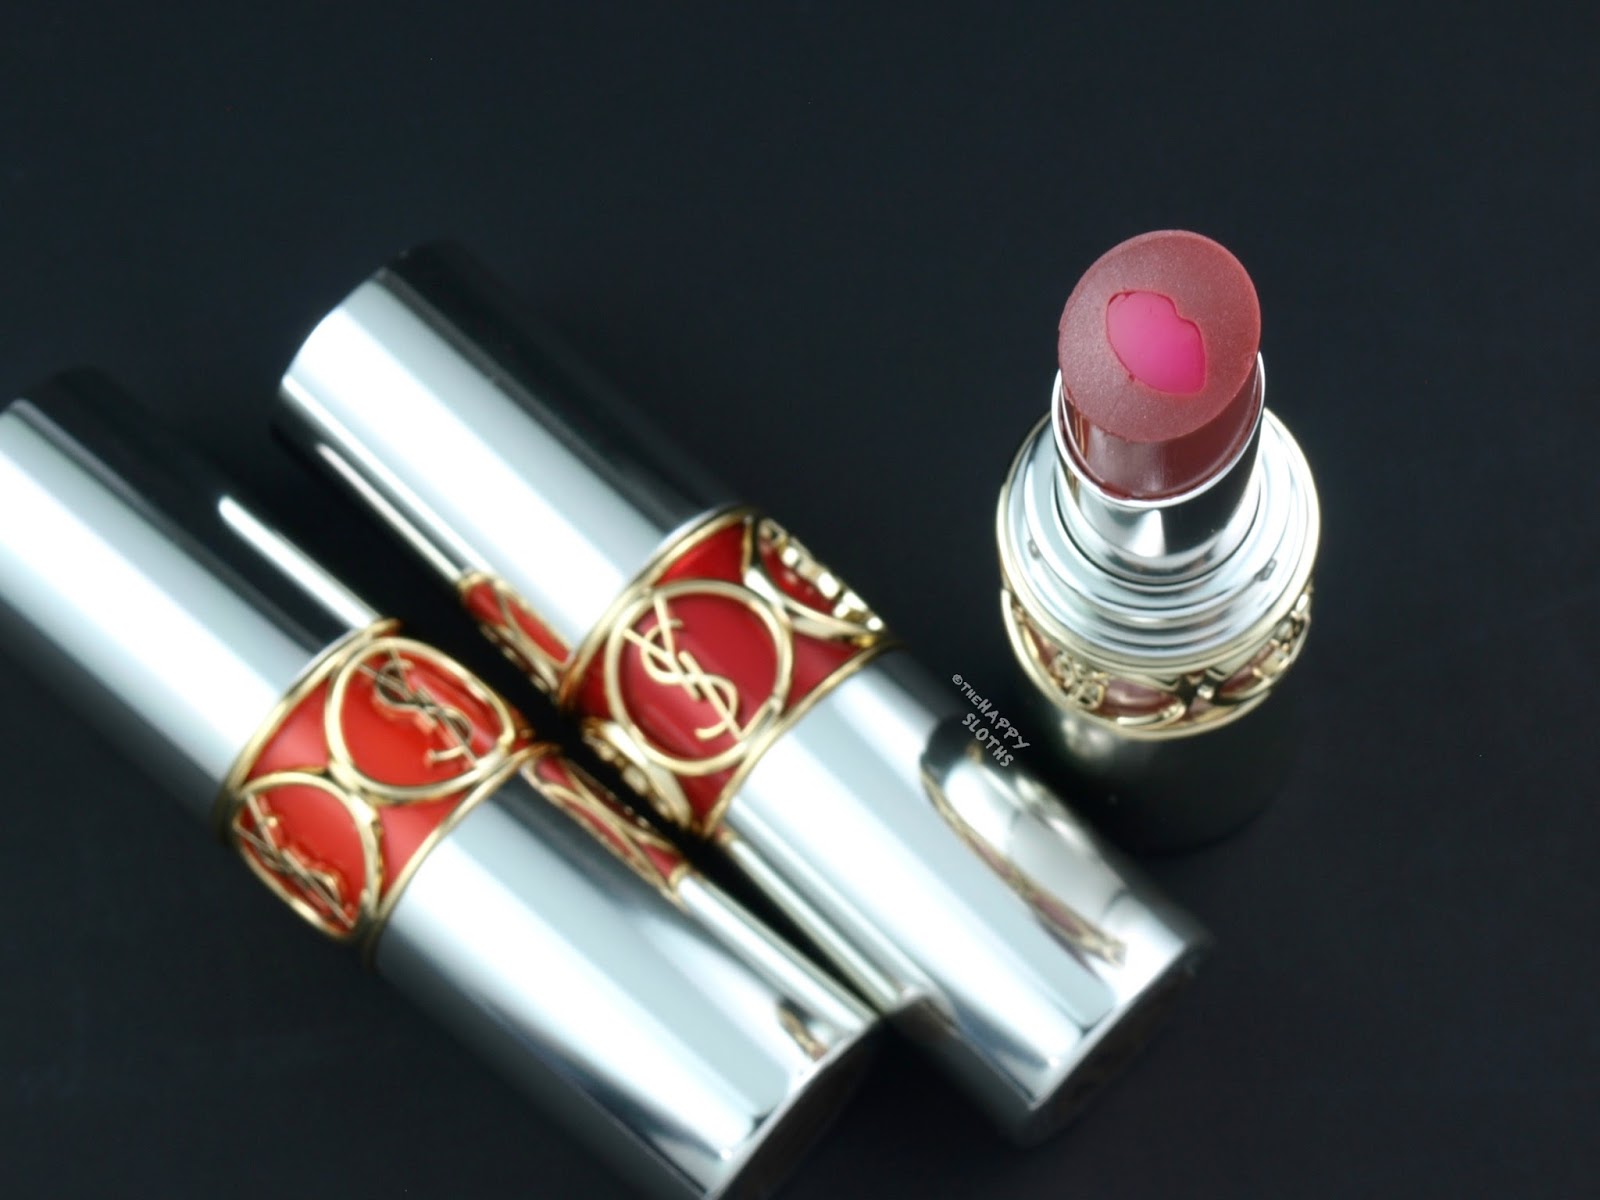 Yves Saint Laurent Volupte Tint-in-Balm: Review and Swatches